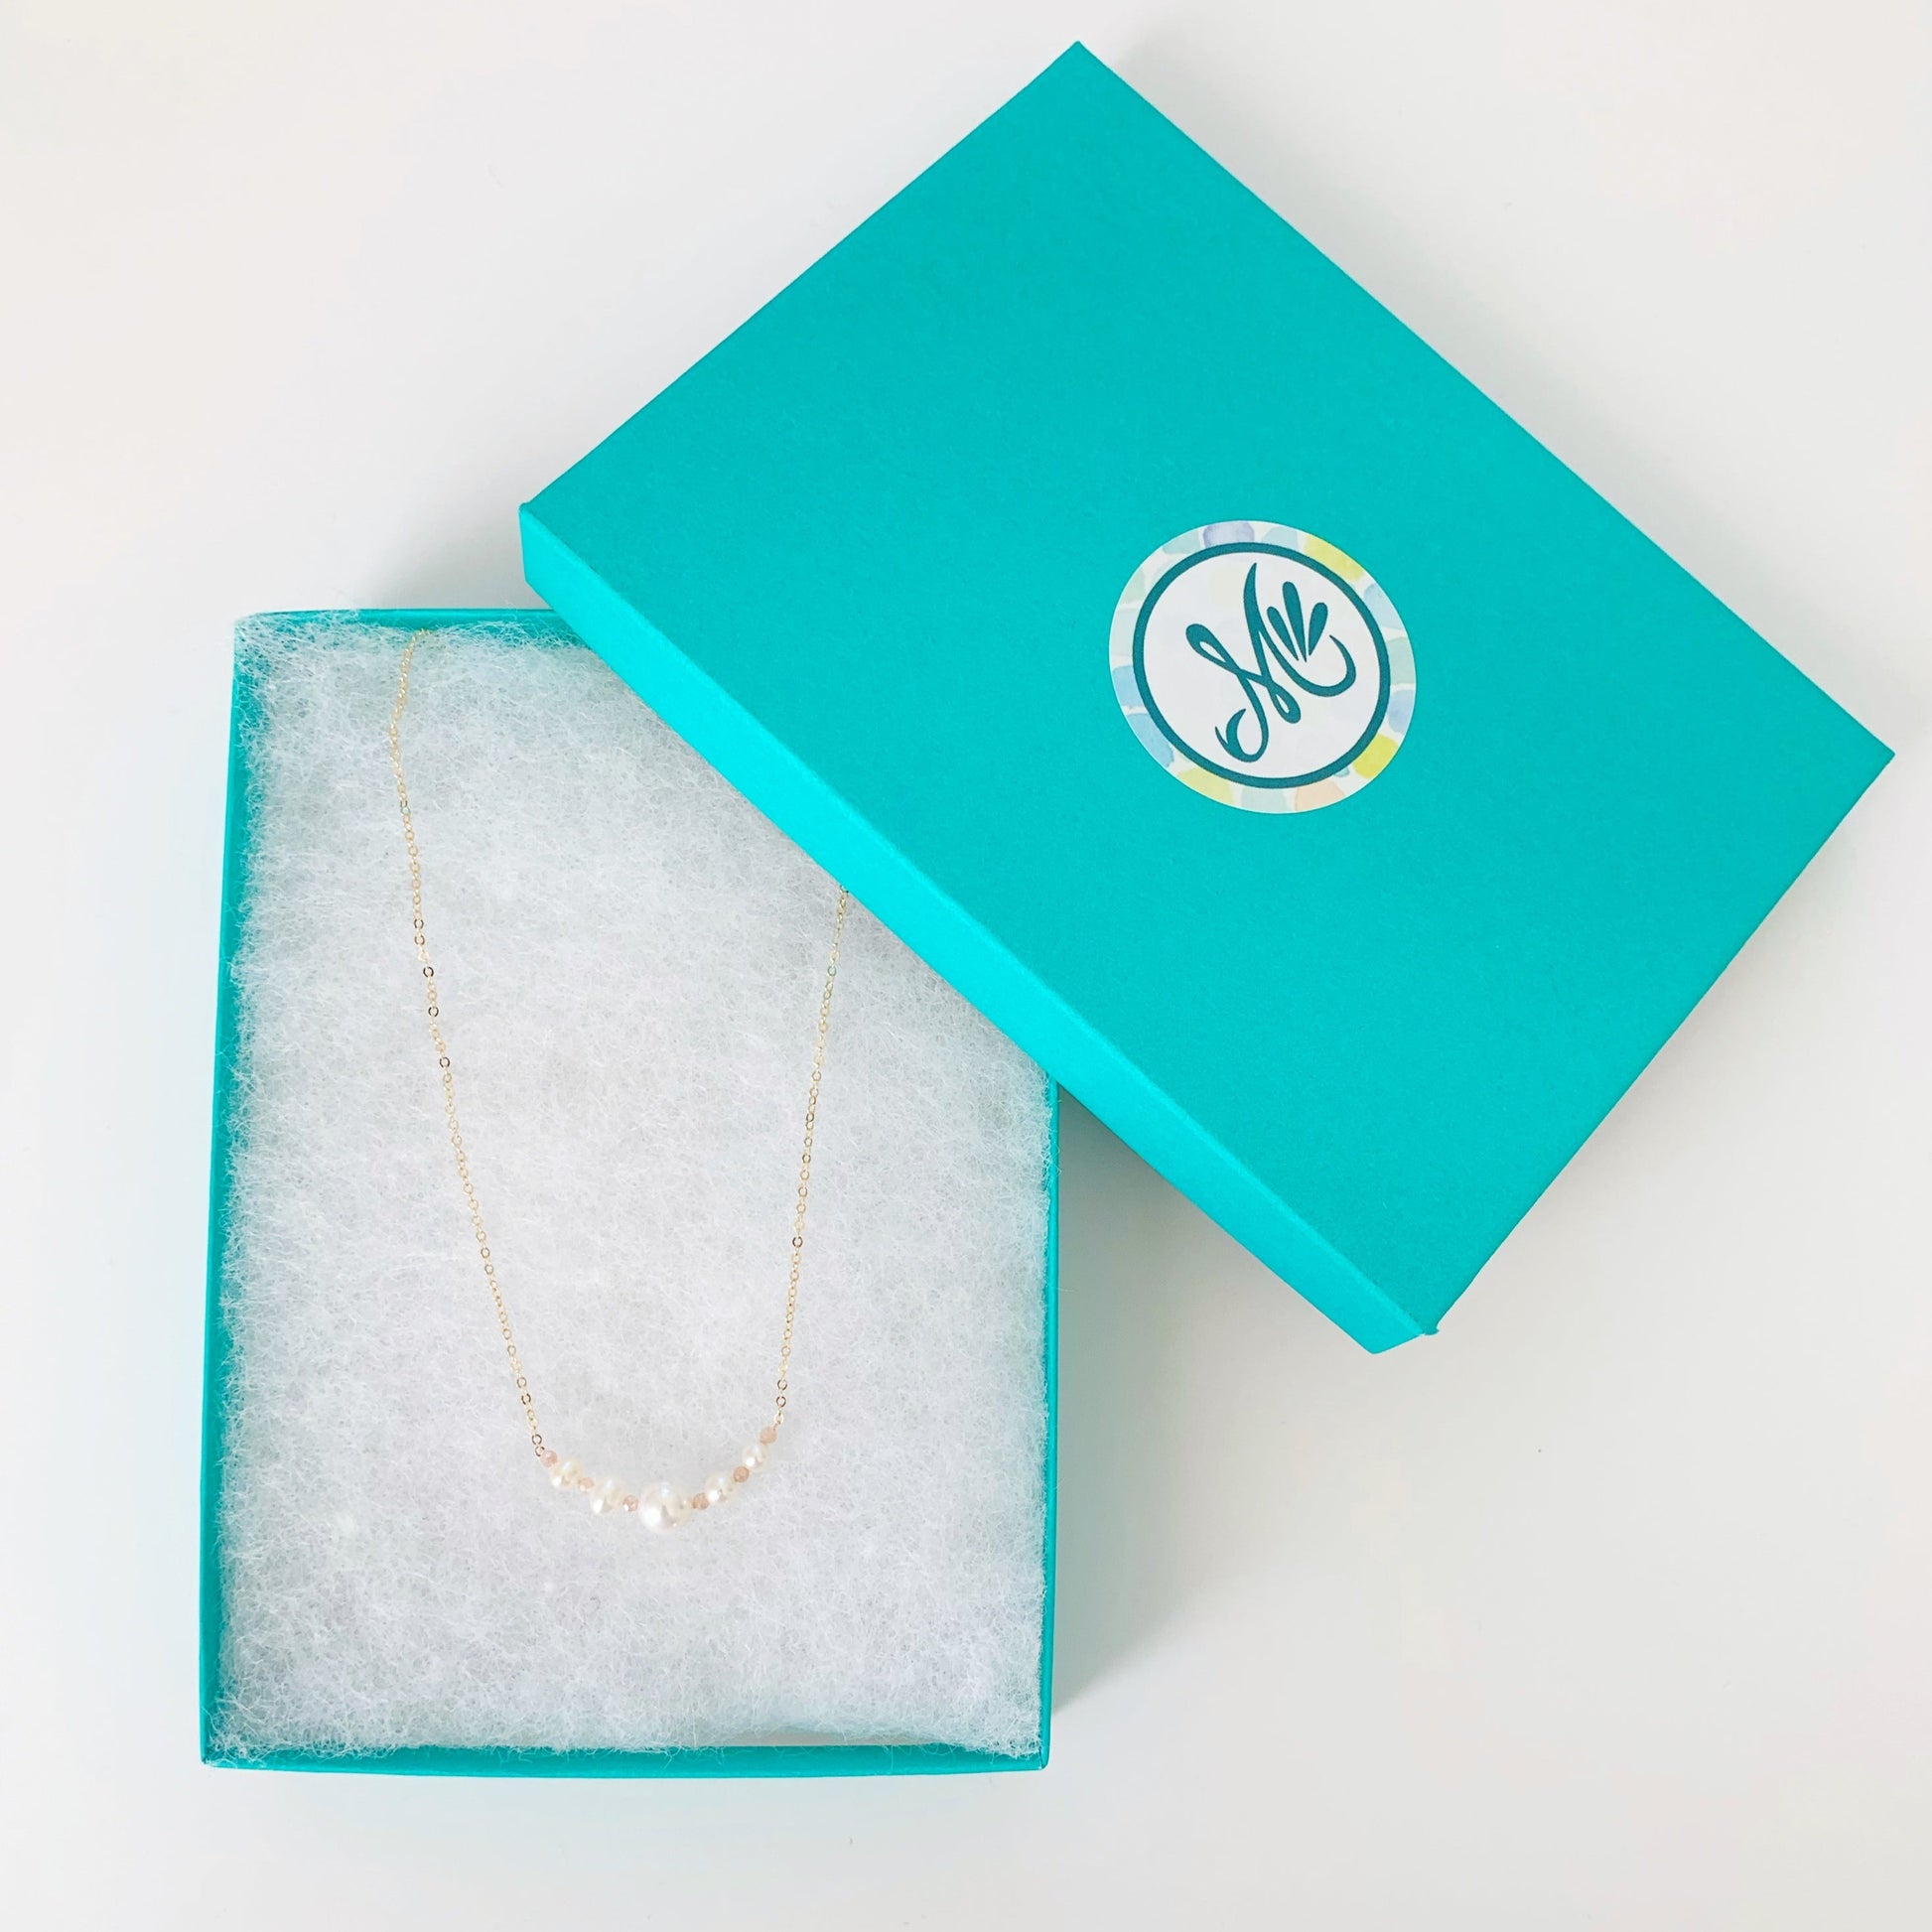 The barrington freshwater pearl and peach moonstone necklace with 14k gold filled chain and findings pictured in a teal gift box on a white surface